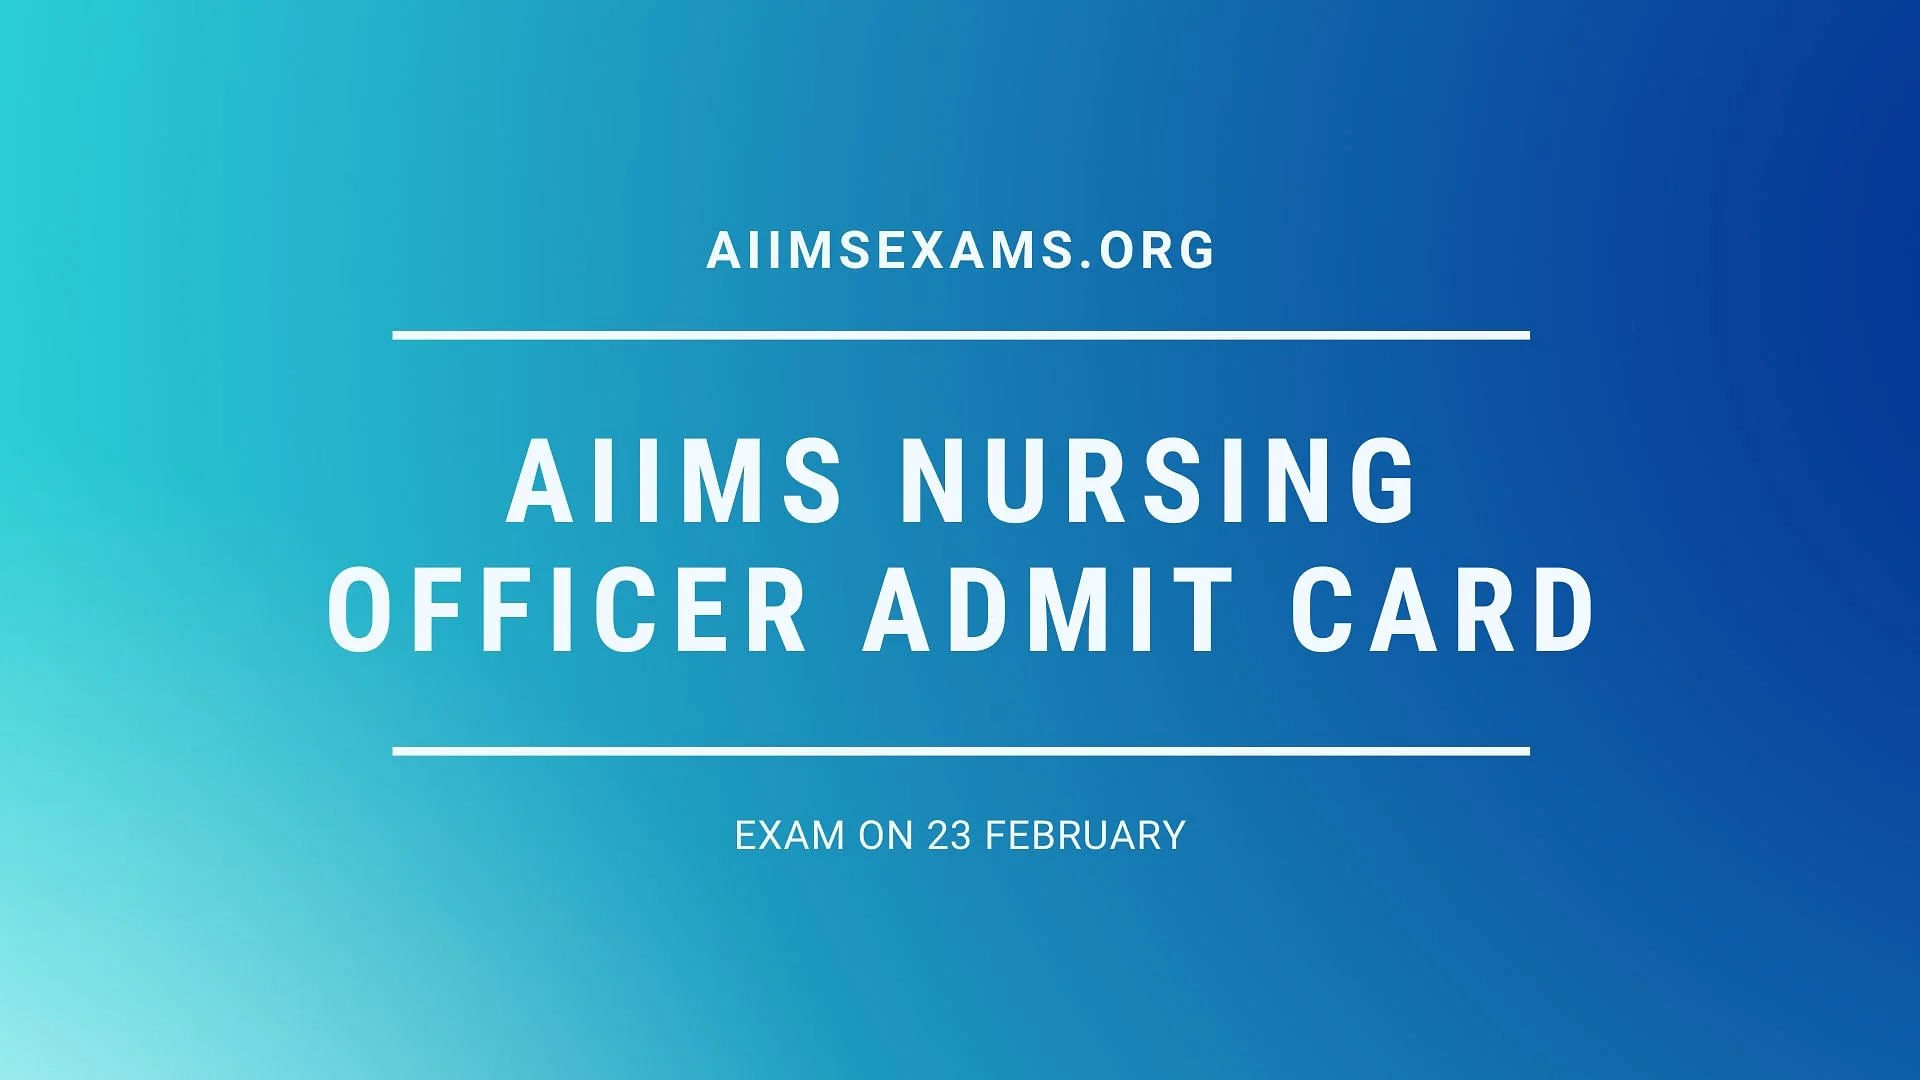 AIIMS Nursing Officer Admit Card Released.